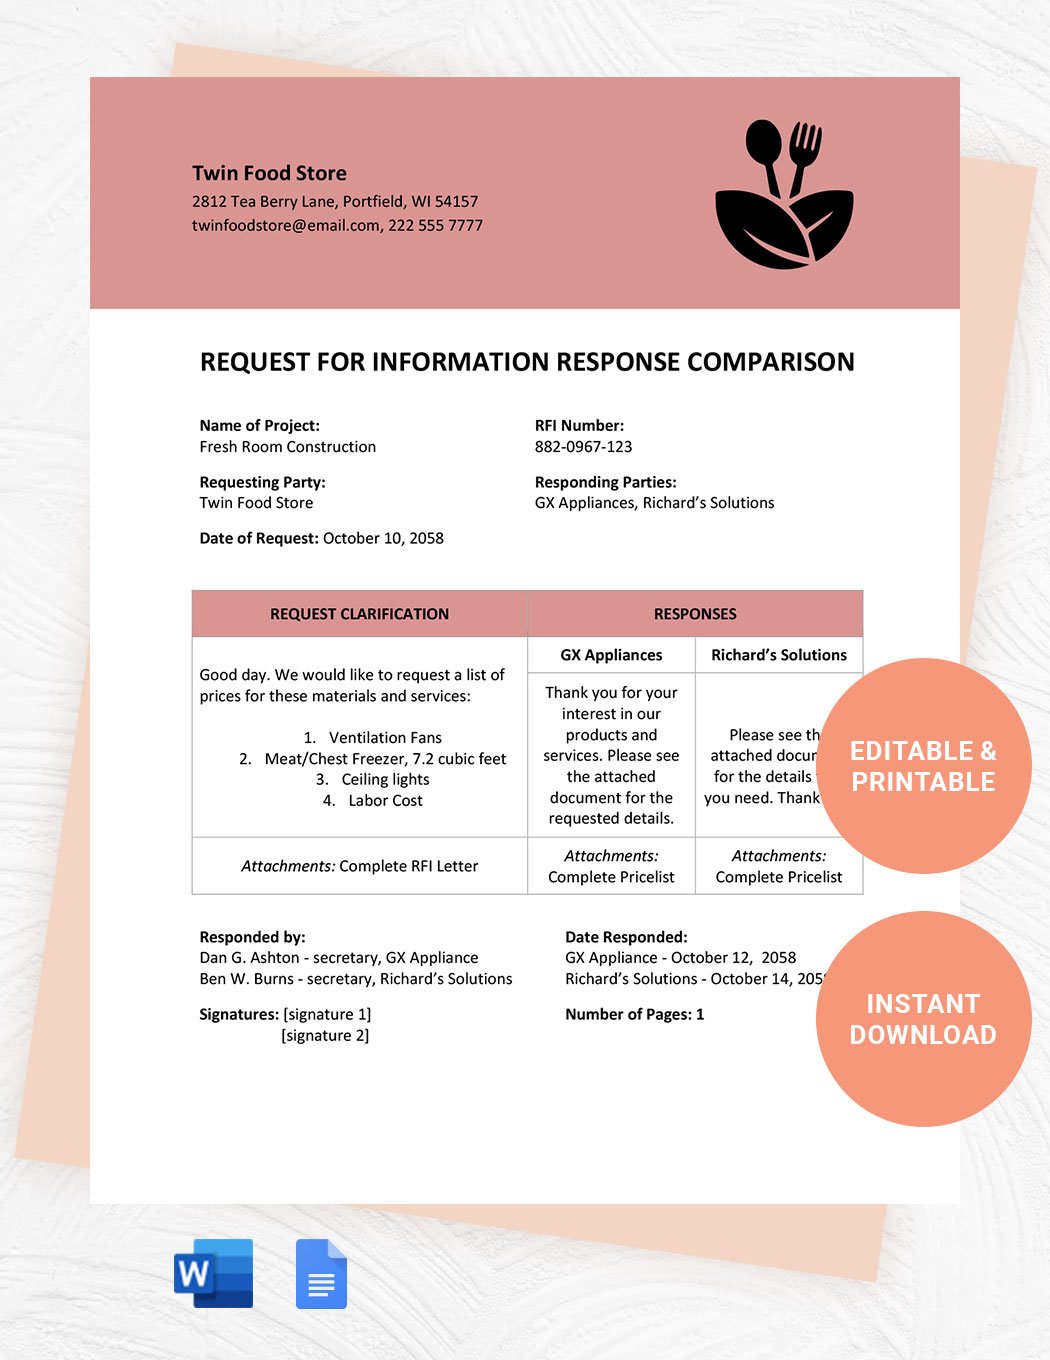 Request For Information Response Comparison Template in Word, Google Docs